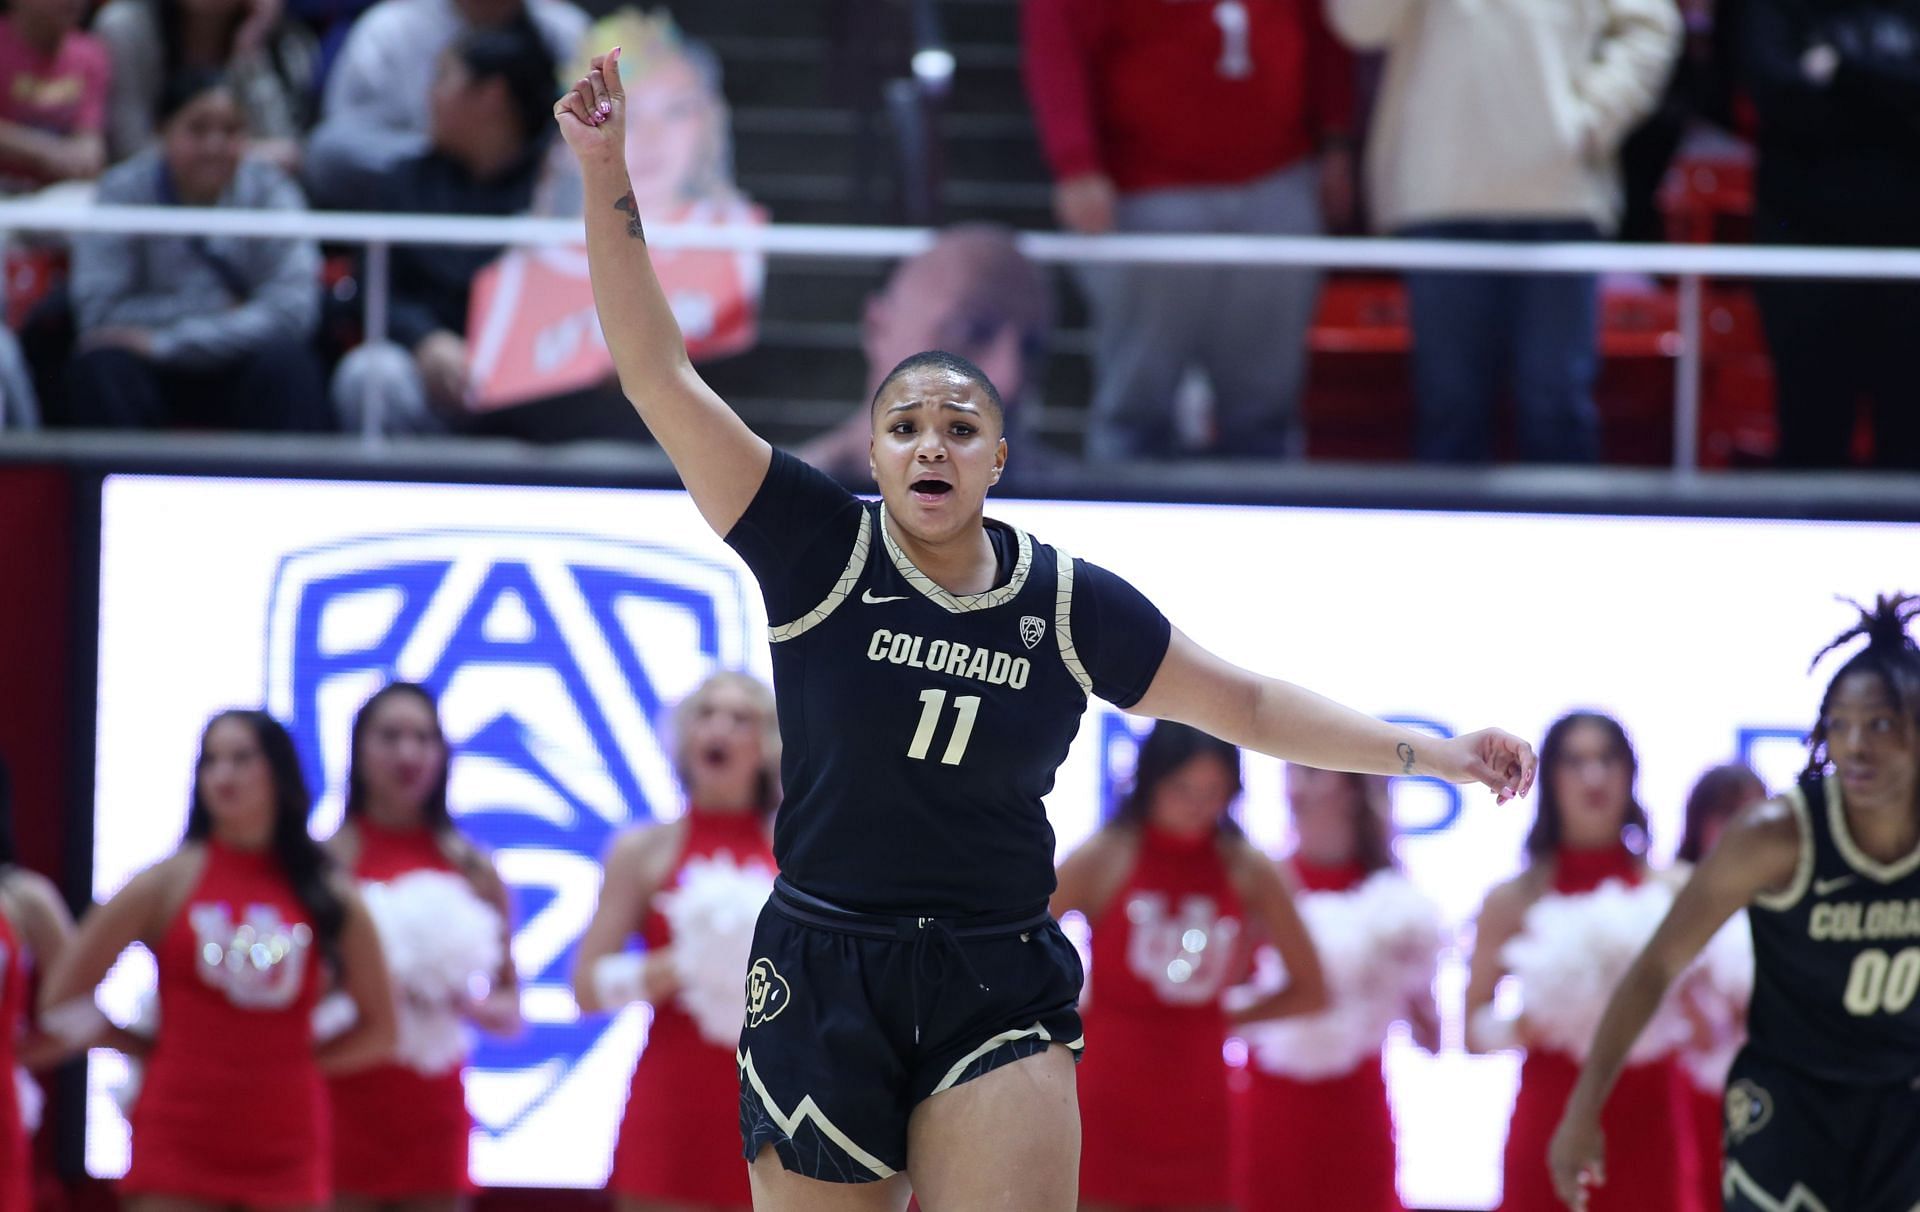 Colorado&#039;s Quay Miller averaged 8.9 points and 7.4 rebounds per game in the just-concluded NCAA season.